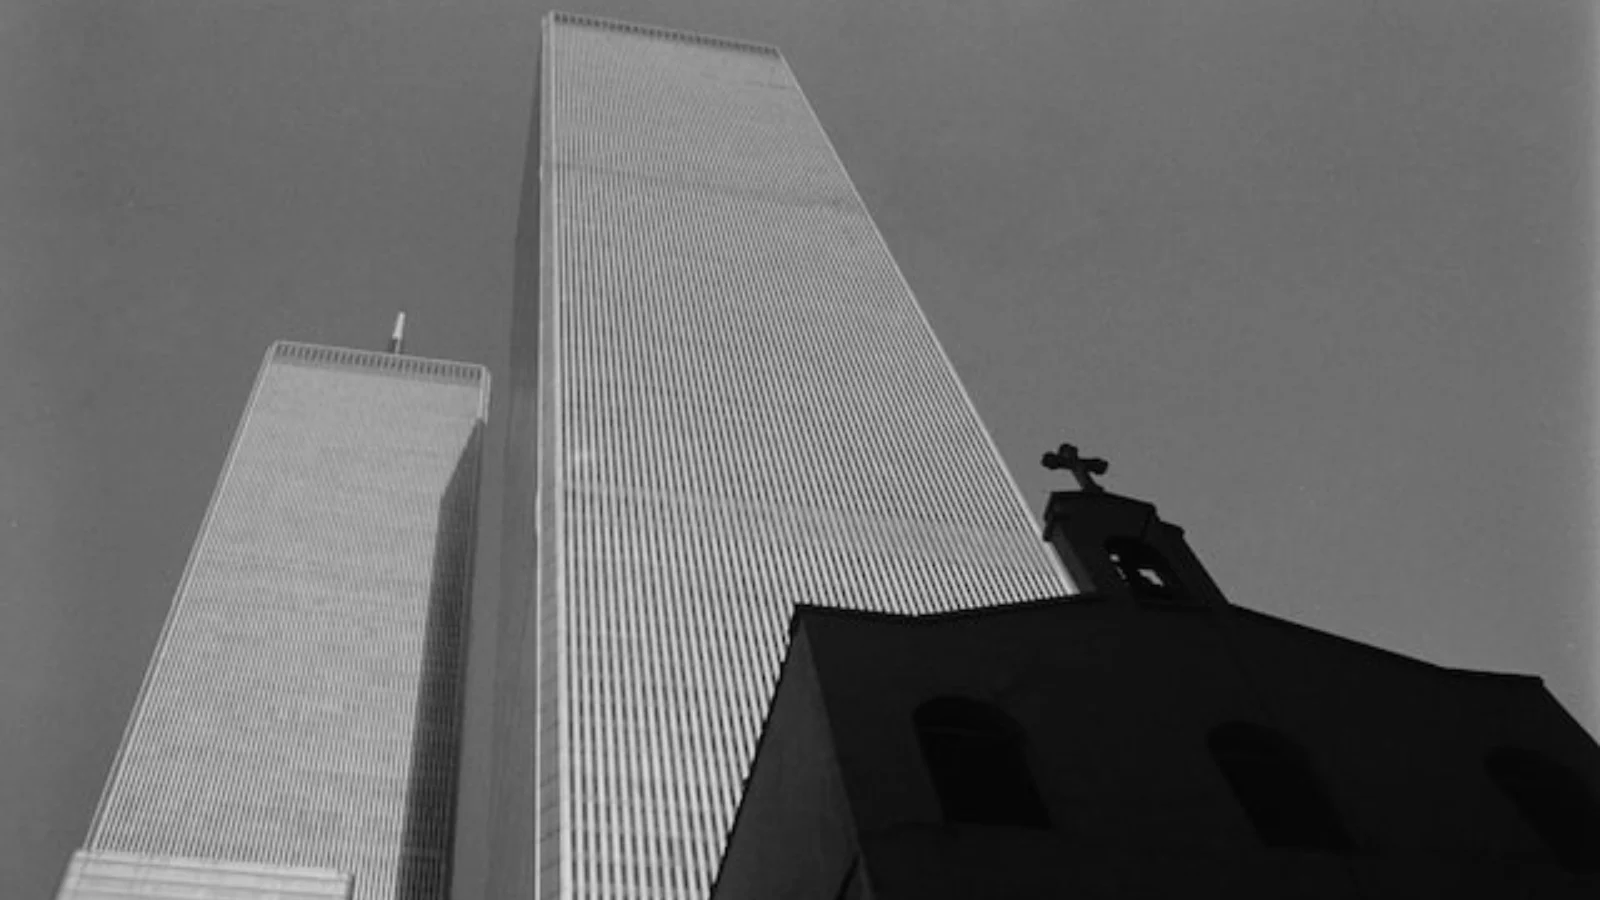 A black and white image of the Twin Towers.